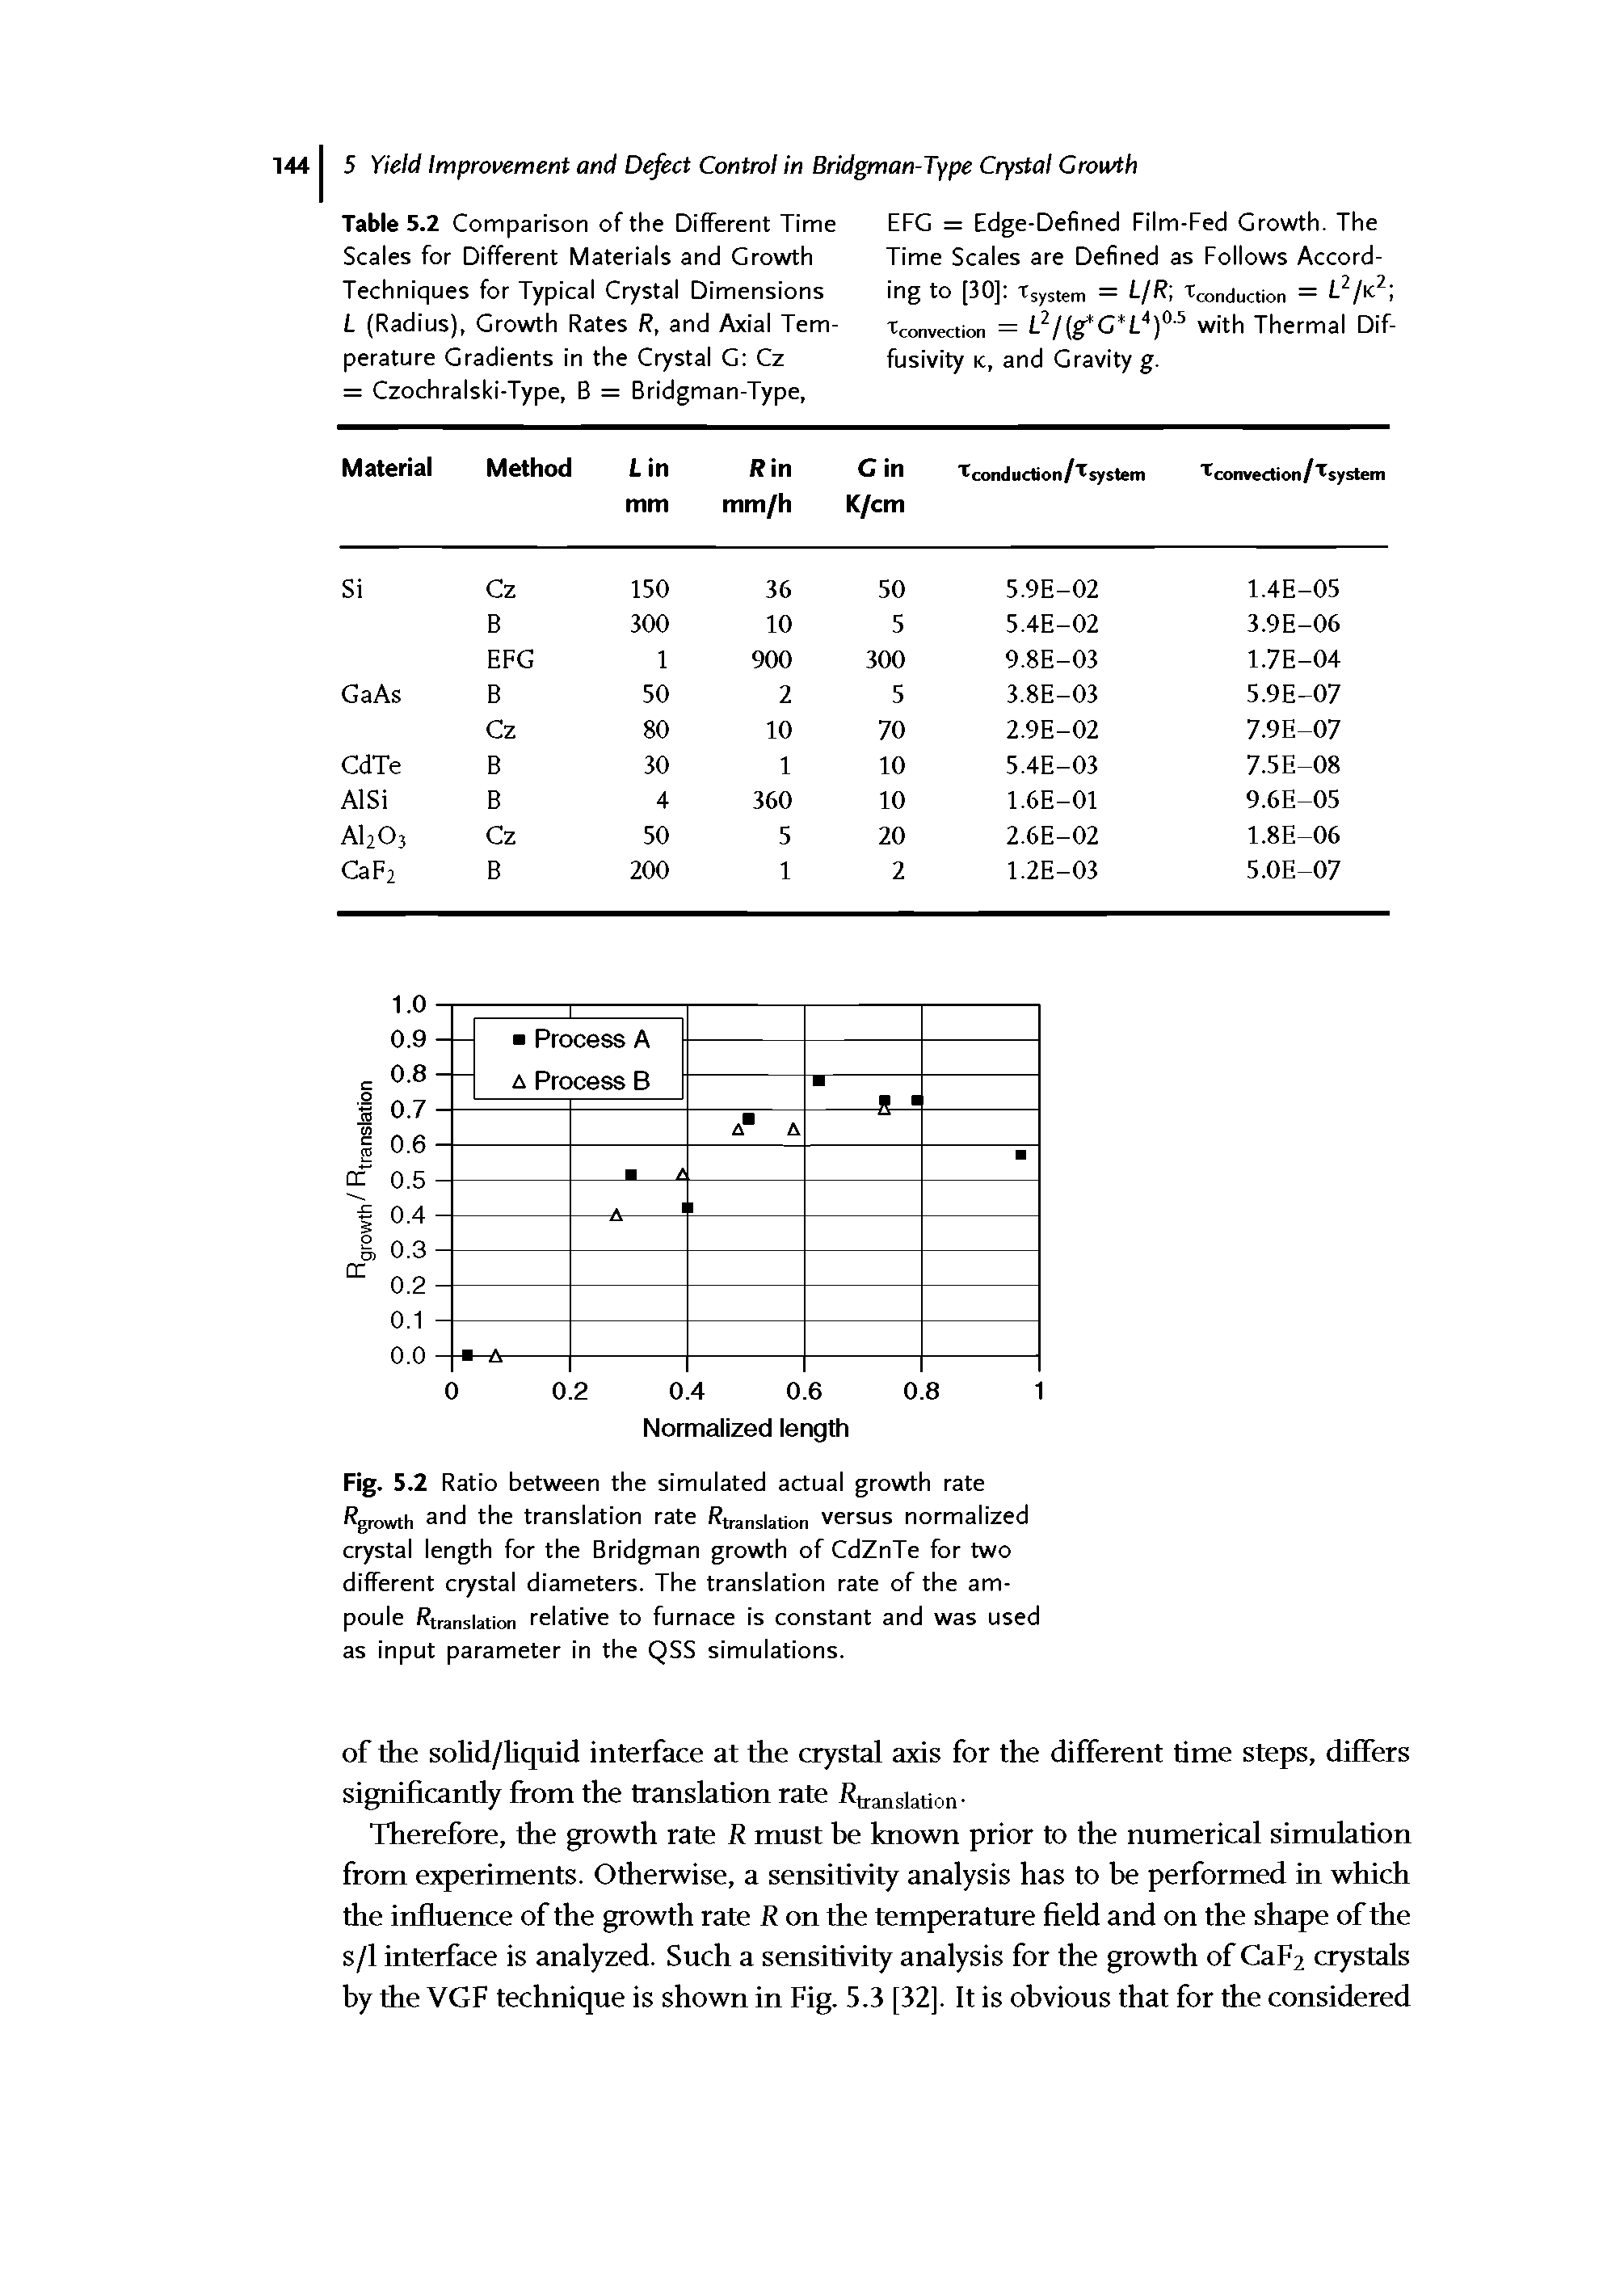 Table 5.2 Comparison of the Different Time Scales for Different Materials and Growth Techniques for Typical Crystal Dimensions L (Radius), Growth Rates R, and Axial Temperature Gradients in the Crystal G Cz = Czochralski-Type, B = Bridgman-Type,...